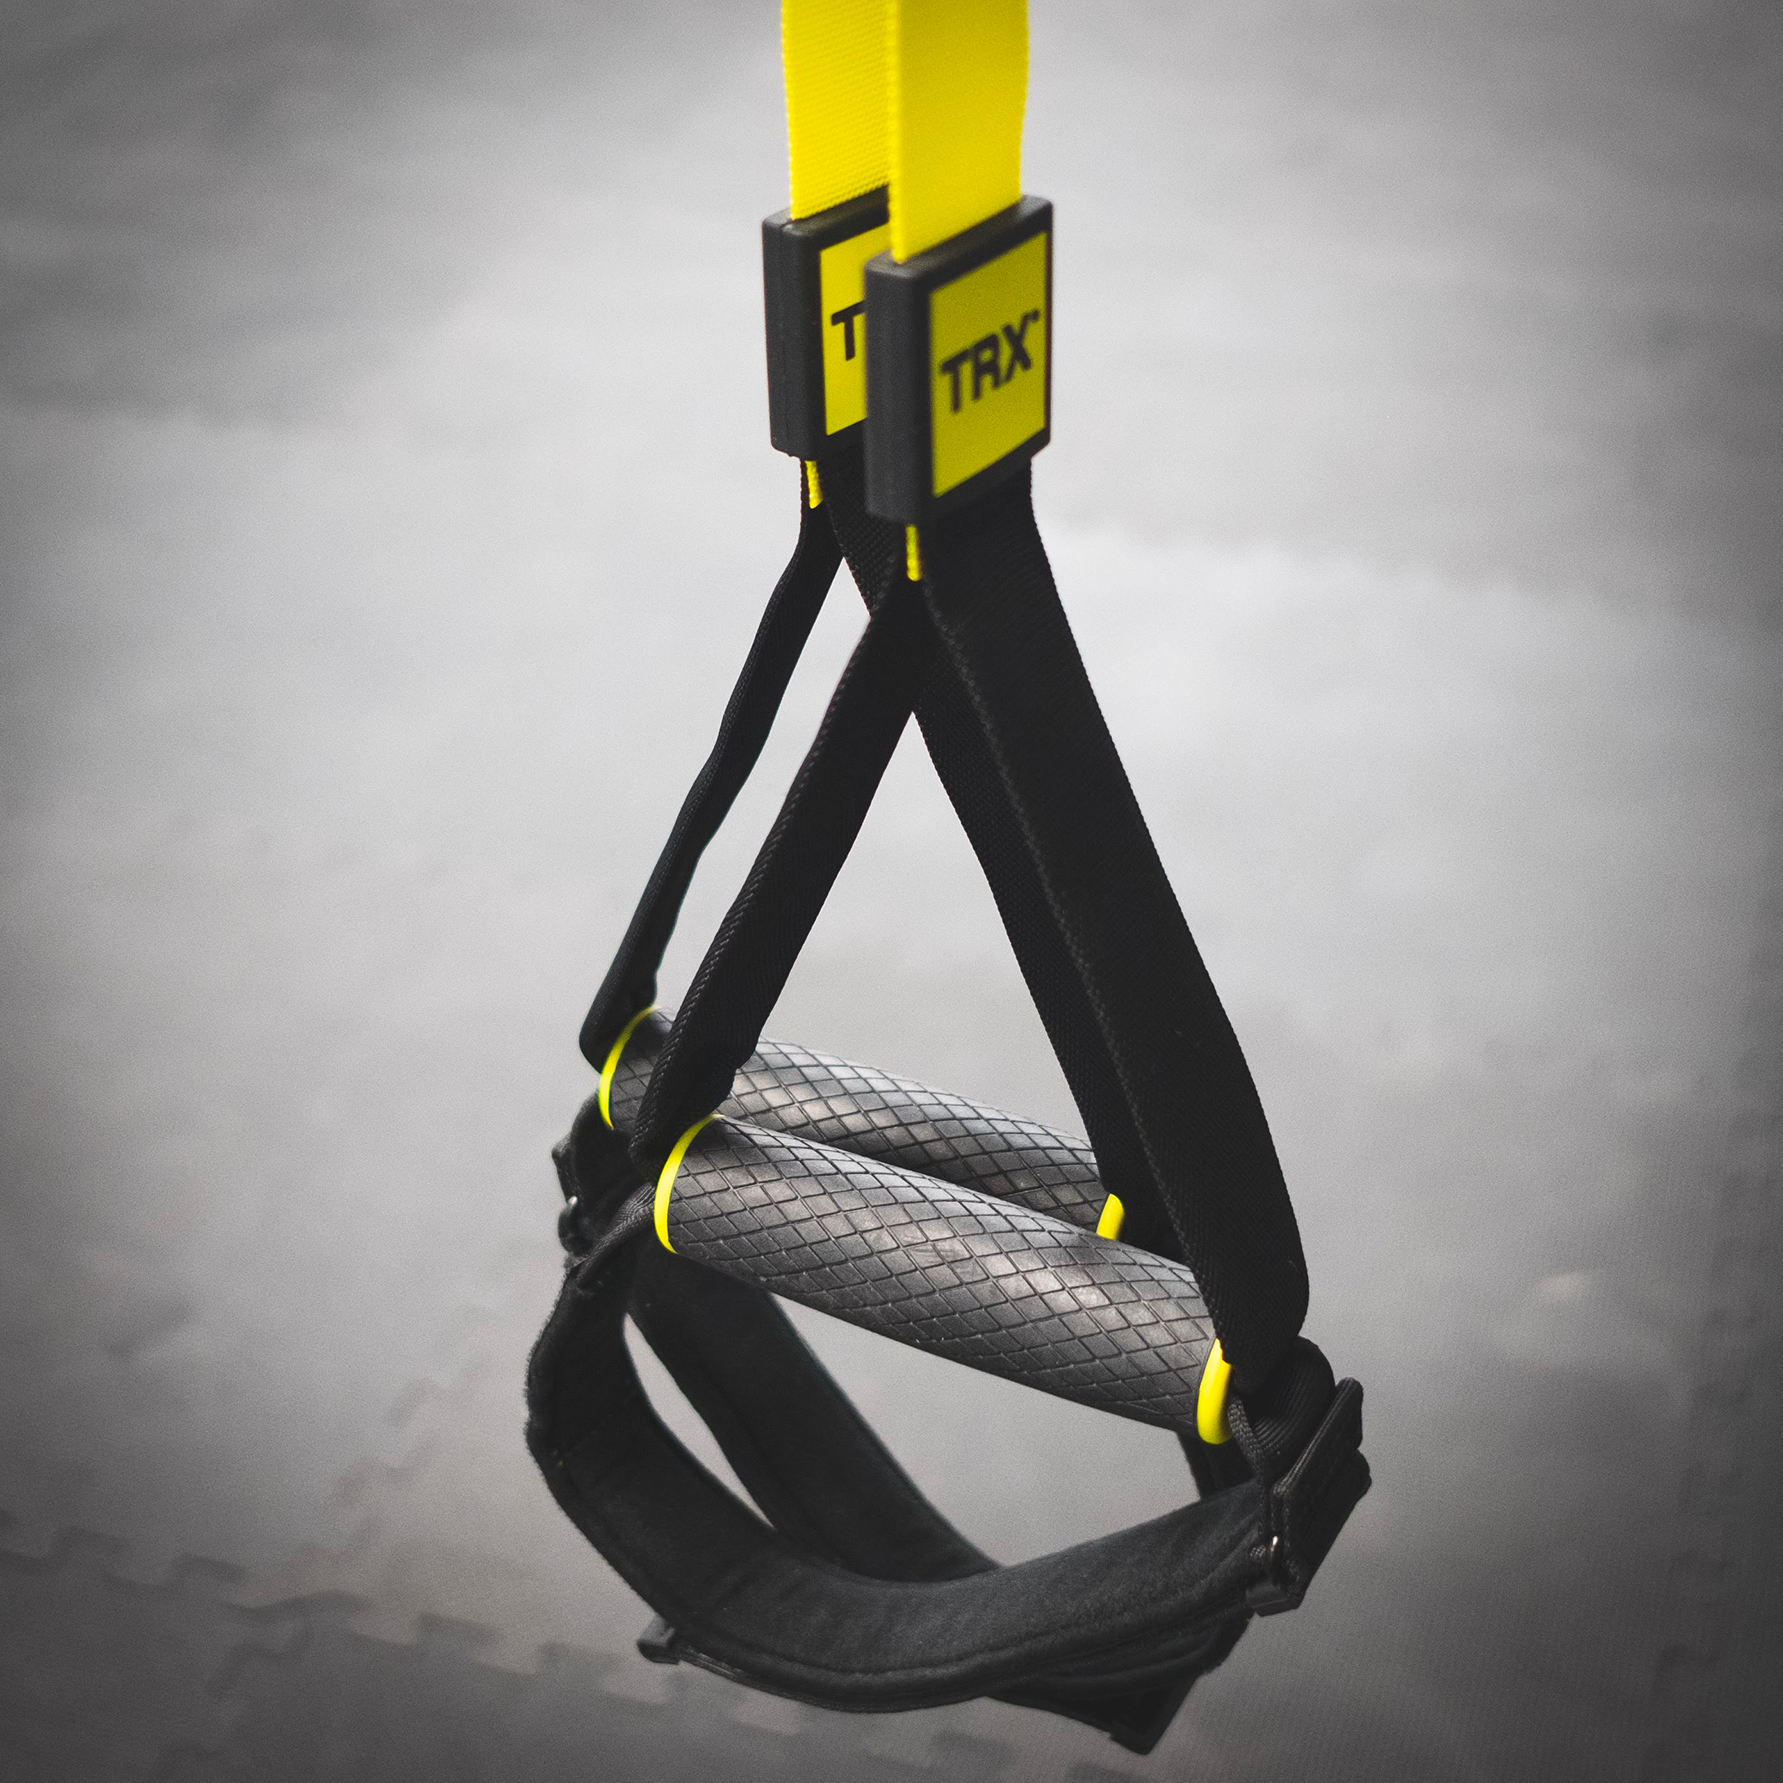 A black and yellow squat bar with yellow handles perfect for women's fitness training.